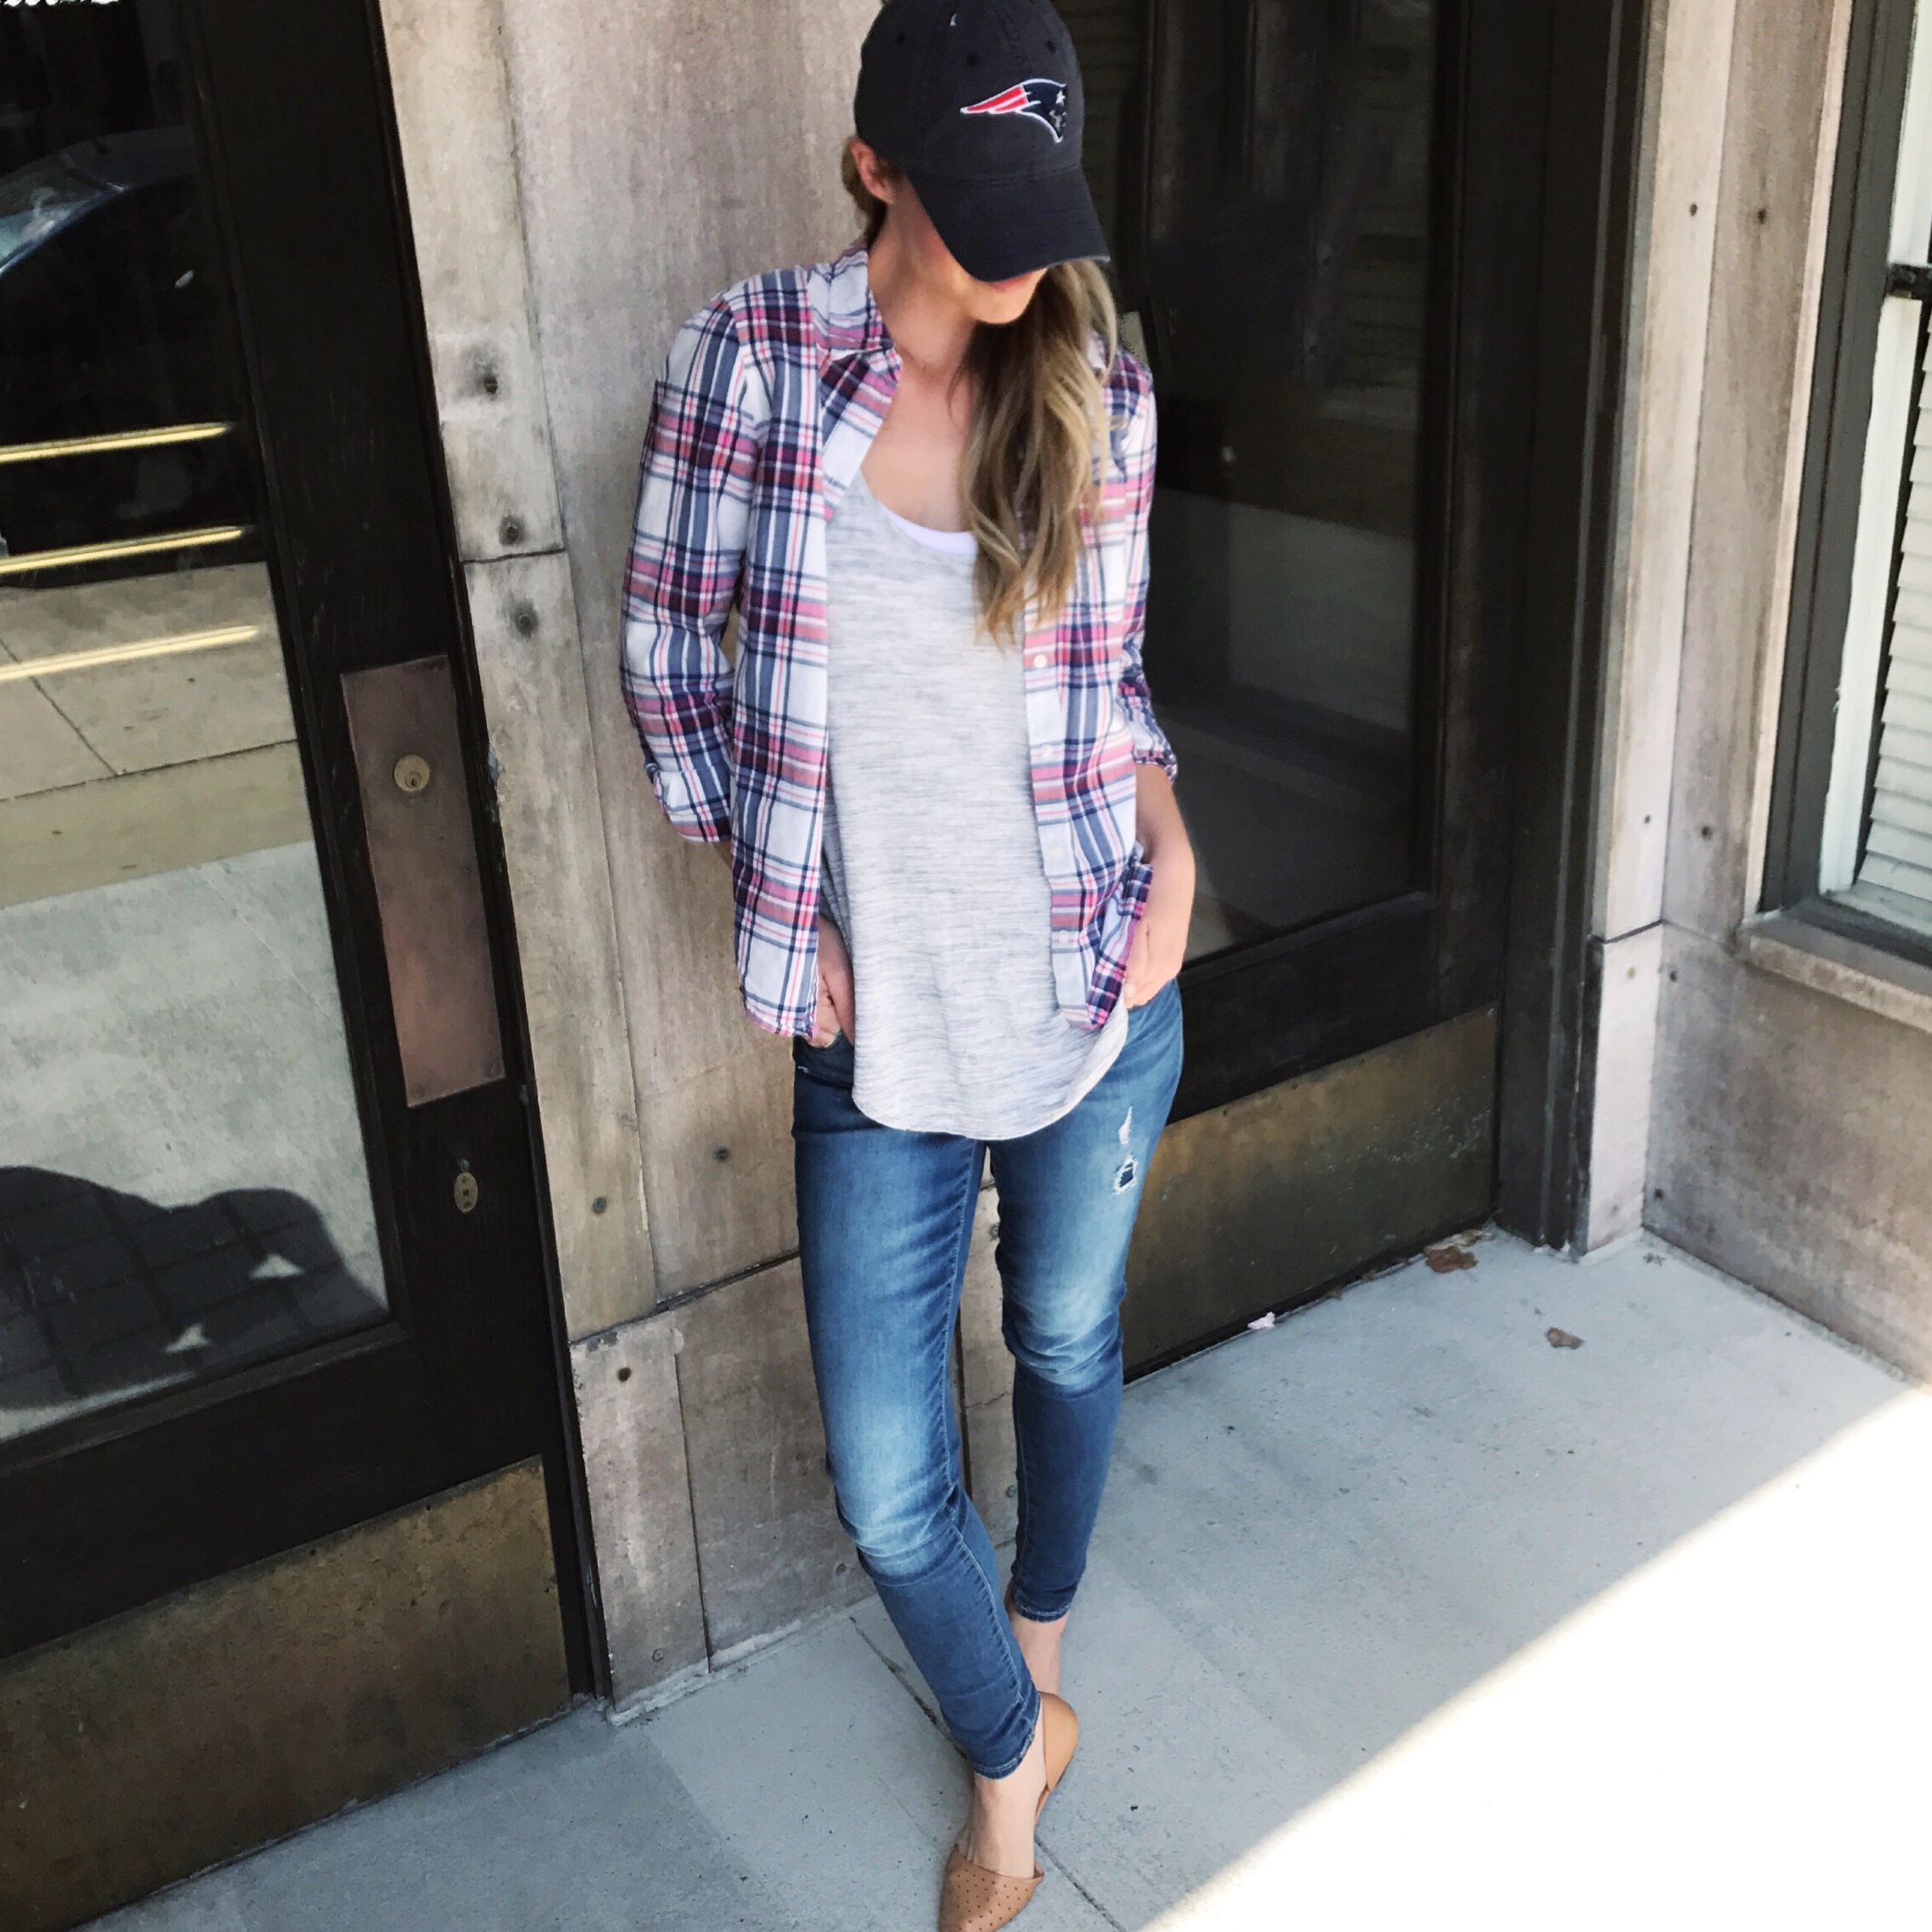 Patriots Hats - My Favorite Patriots Hats, Beanies and Ballcaps via Misty Nelson, NFL Fanstyle Council Influencer --lifestyle blogger @frostedevents 